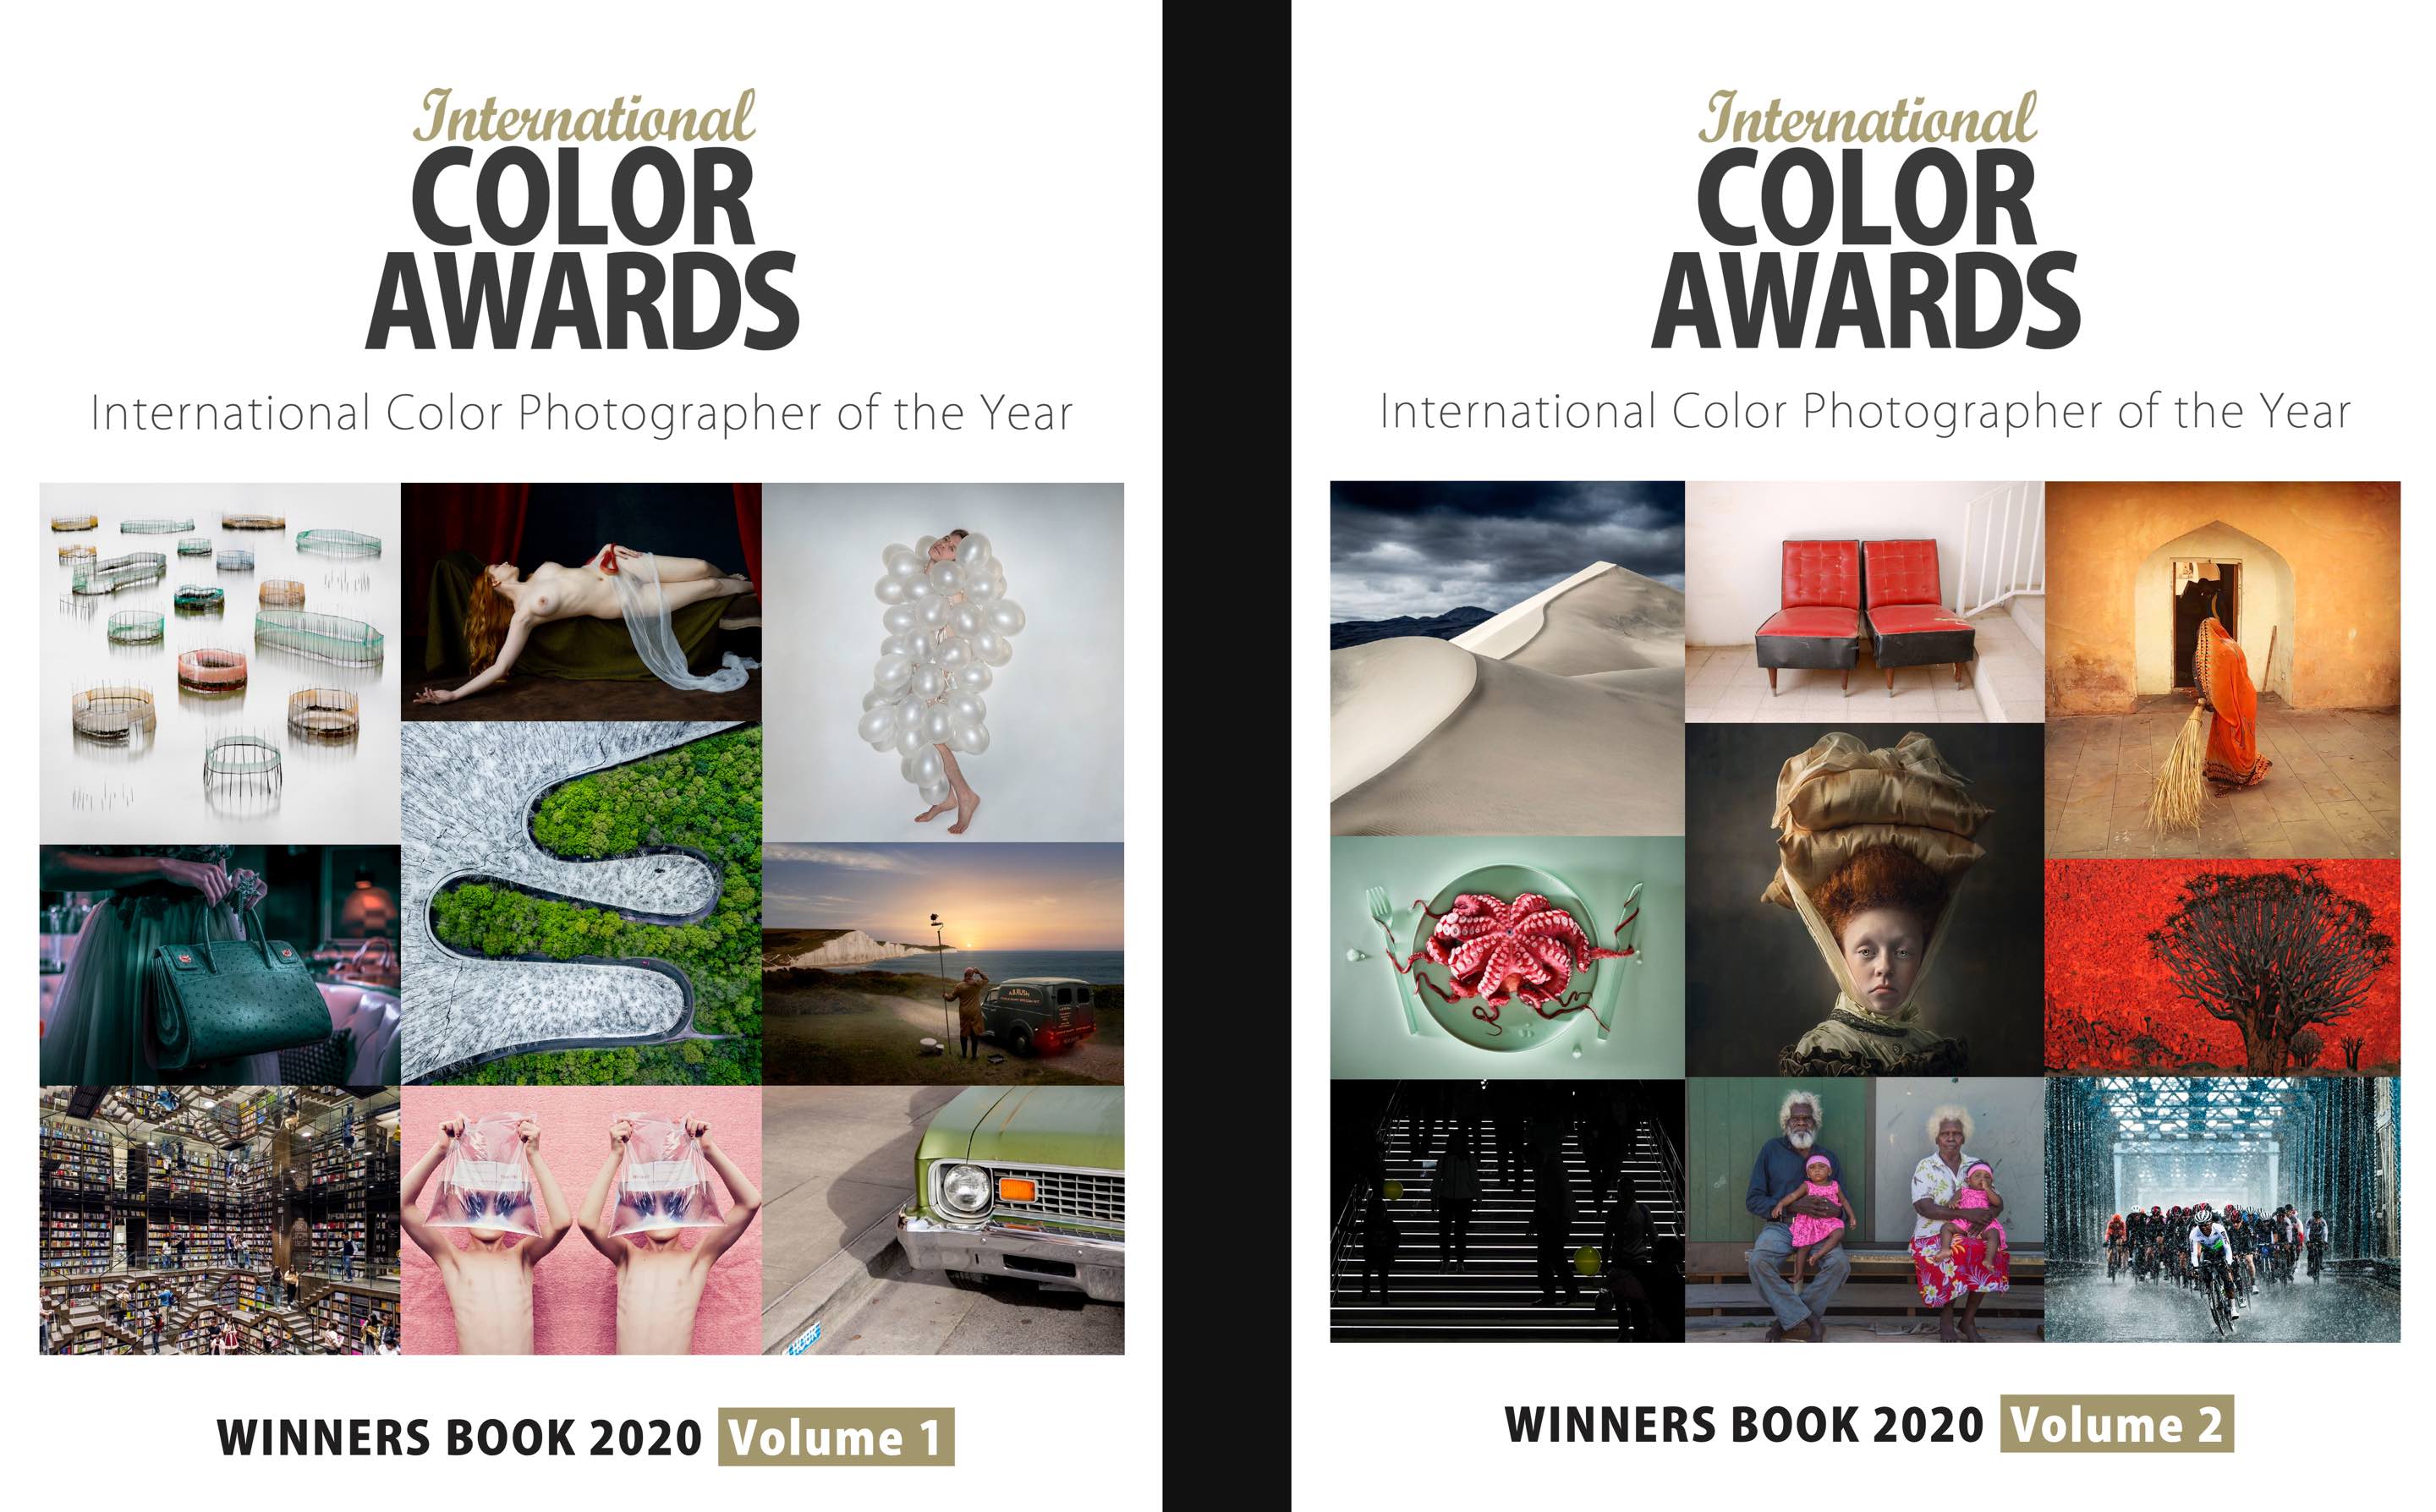 Thor Fine Art Published in the 13th International Color Awards Video